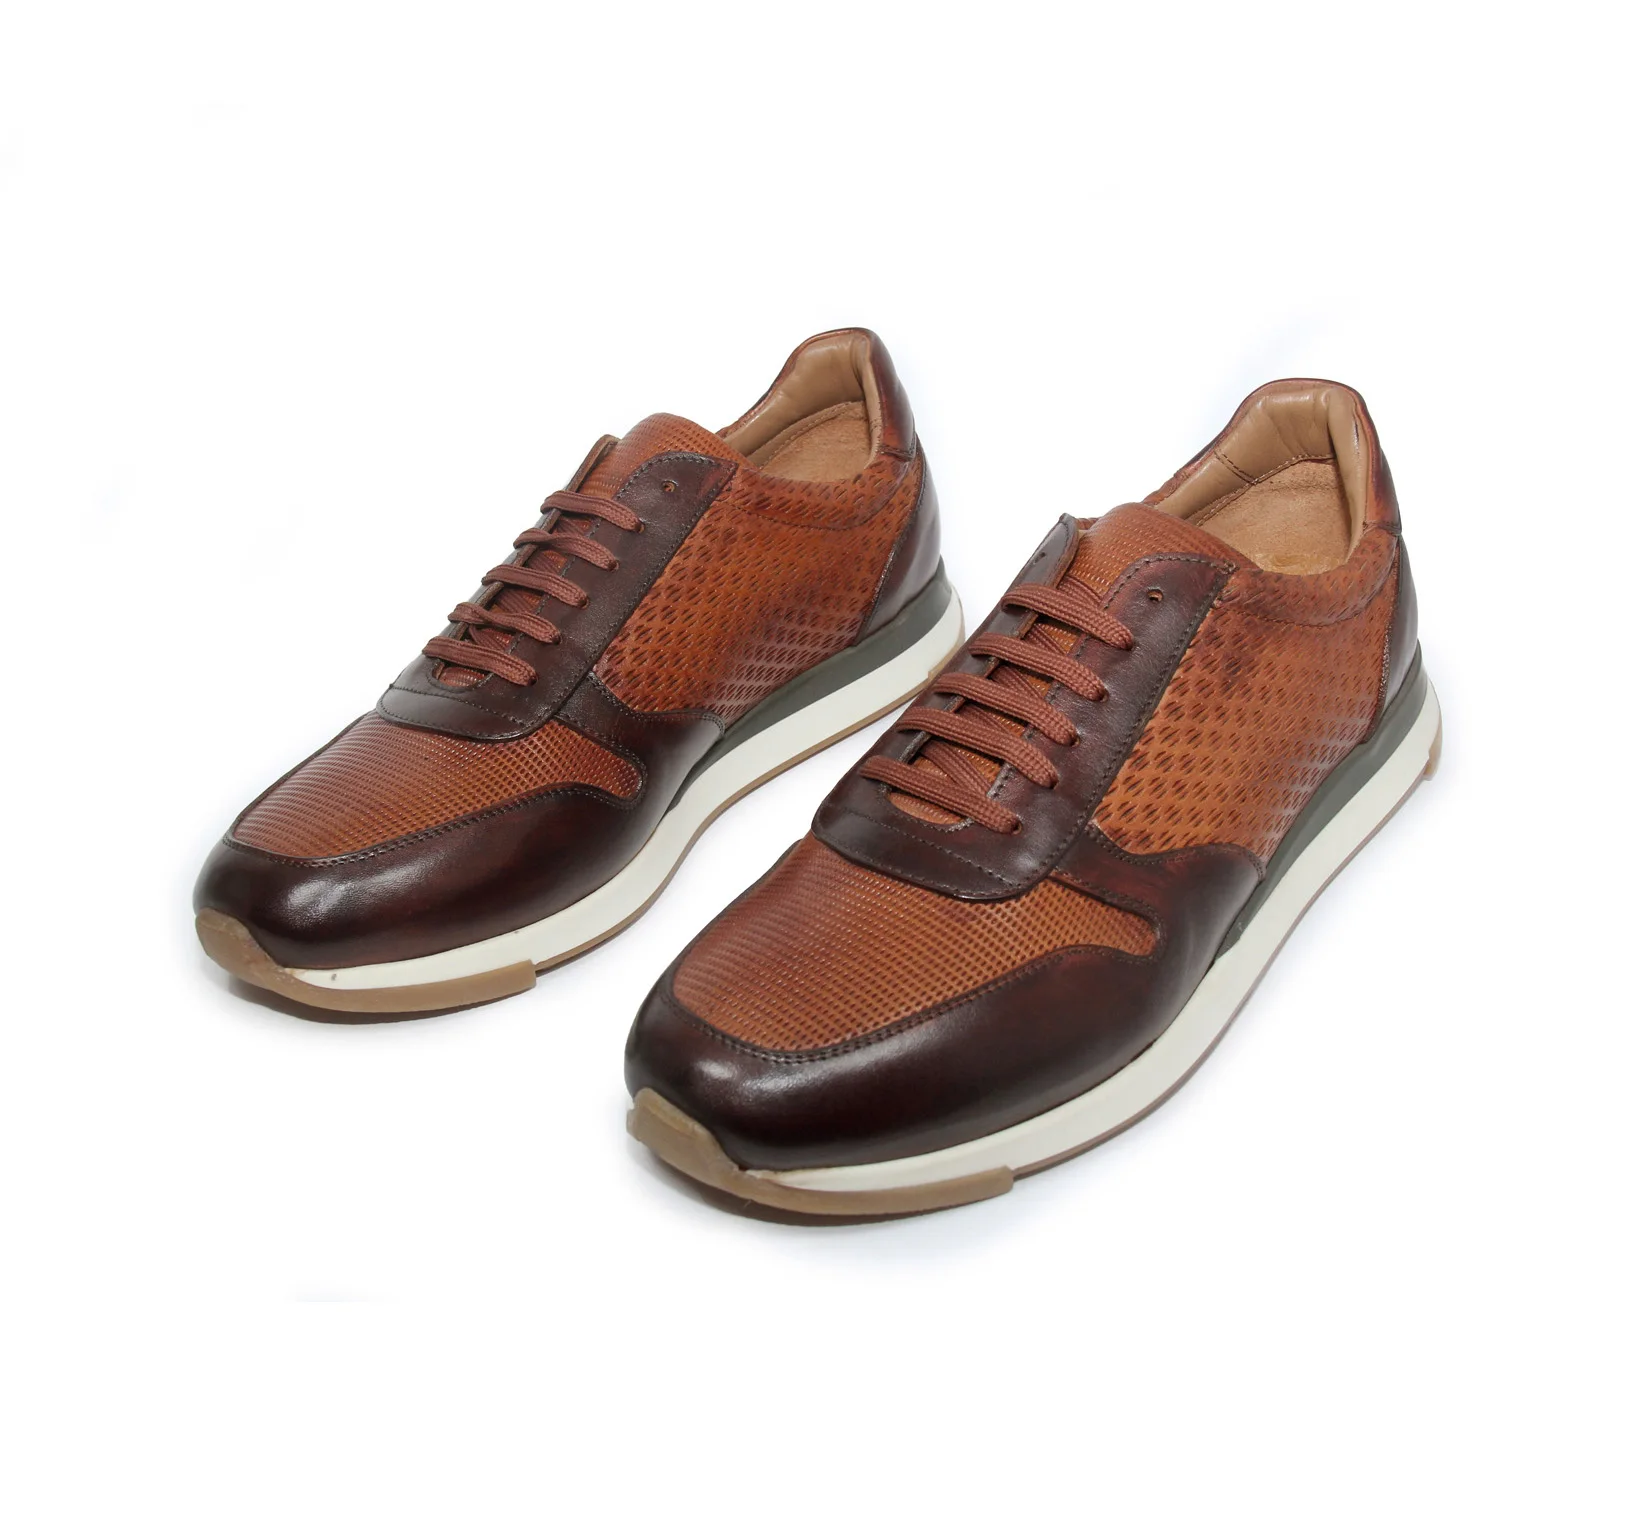 

Handmade Brown Tobacco Sport Trainers, Genuine Calf Leather, Patterned Calfskin, Casual Comfort Shoes for Men